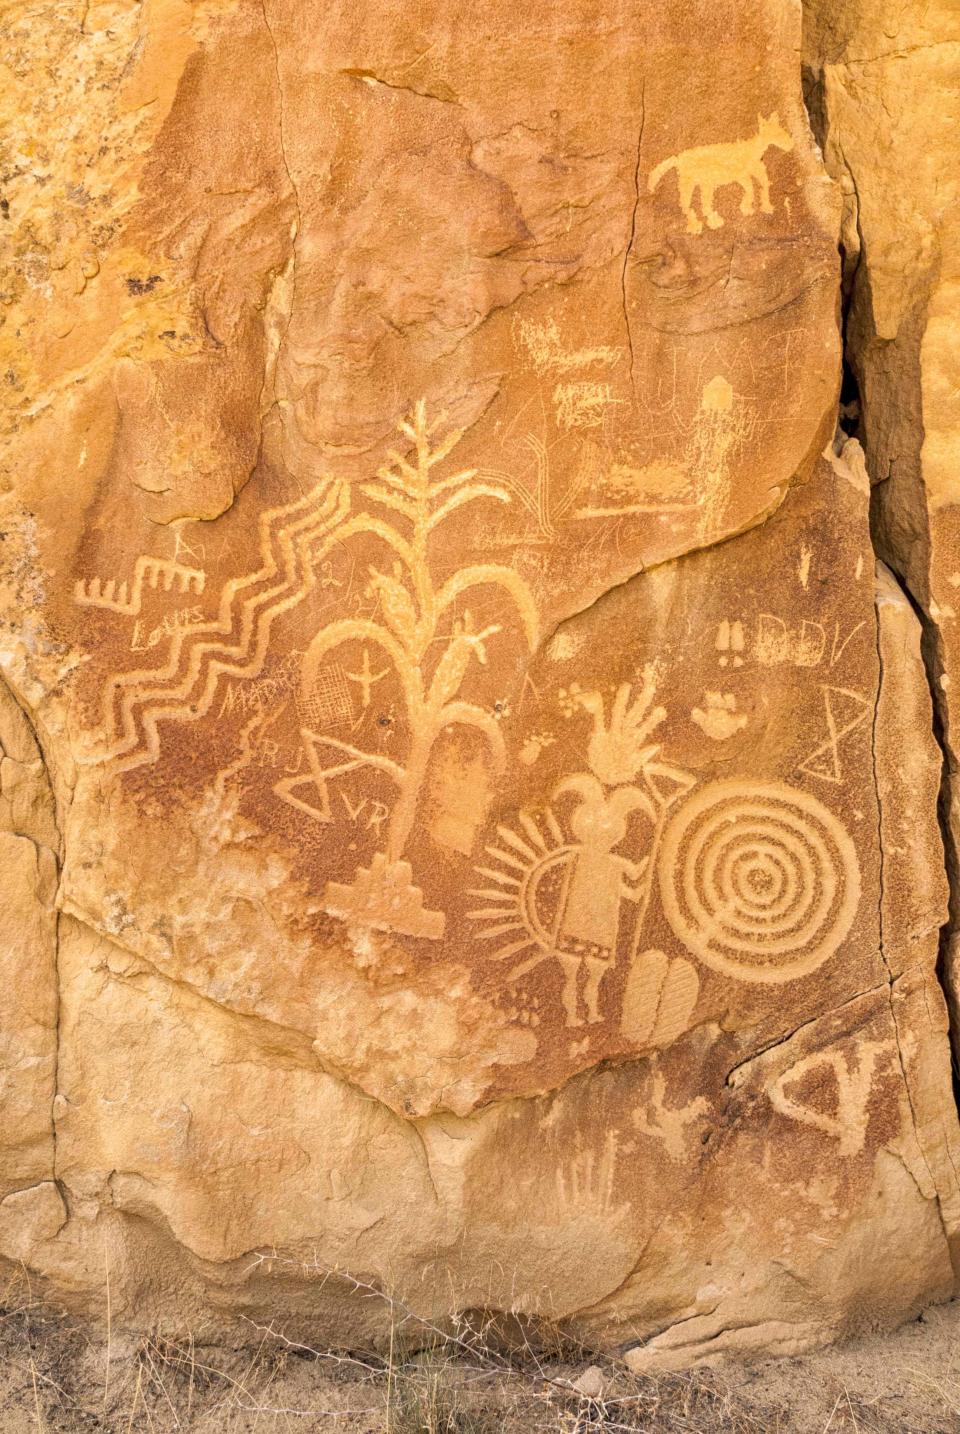 Several field trips to local rock art sites are planned during the American Rock Art Research Association's annual conference in Farmington May 16-20.